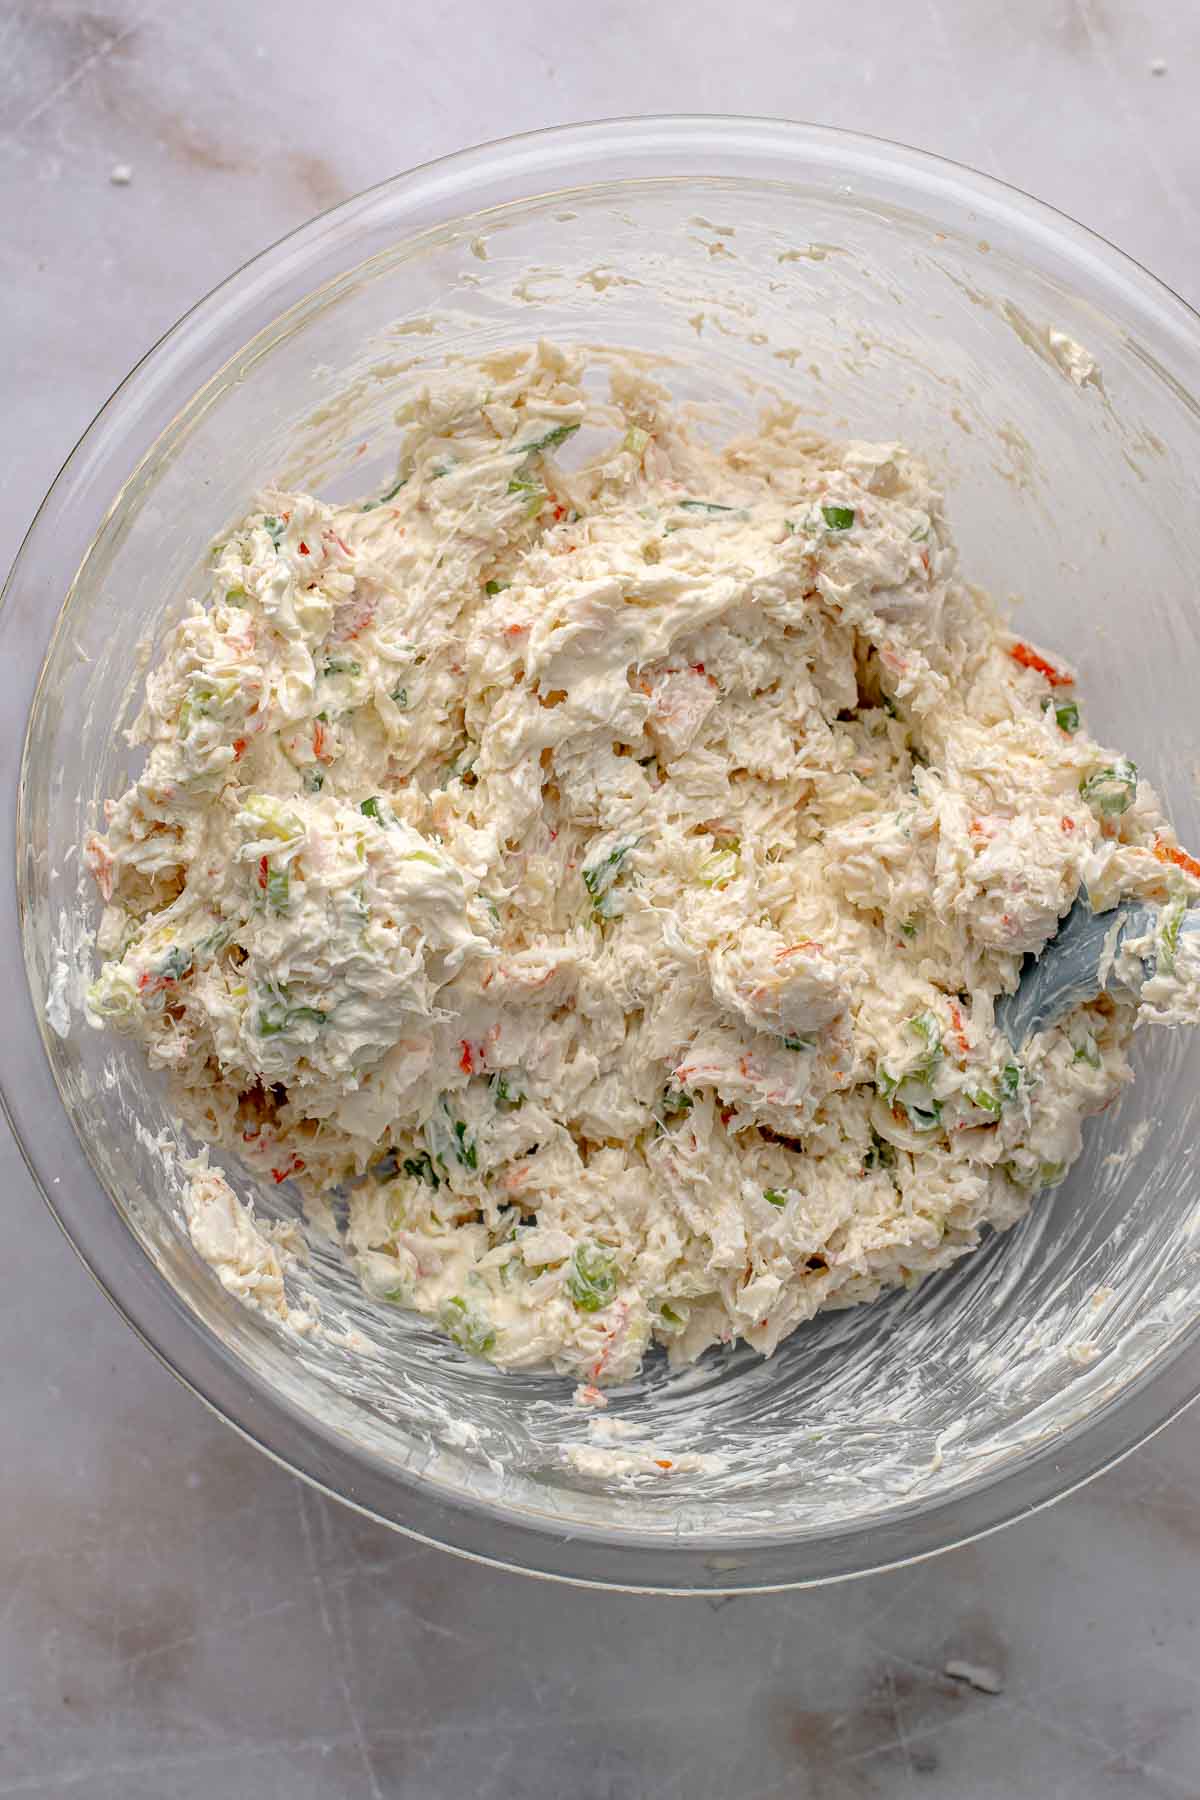 Crab filling ingredients mixed together in a mixing bowl.